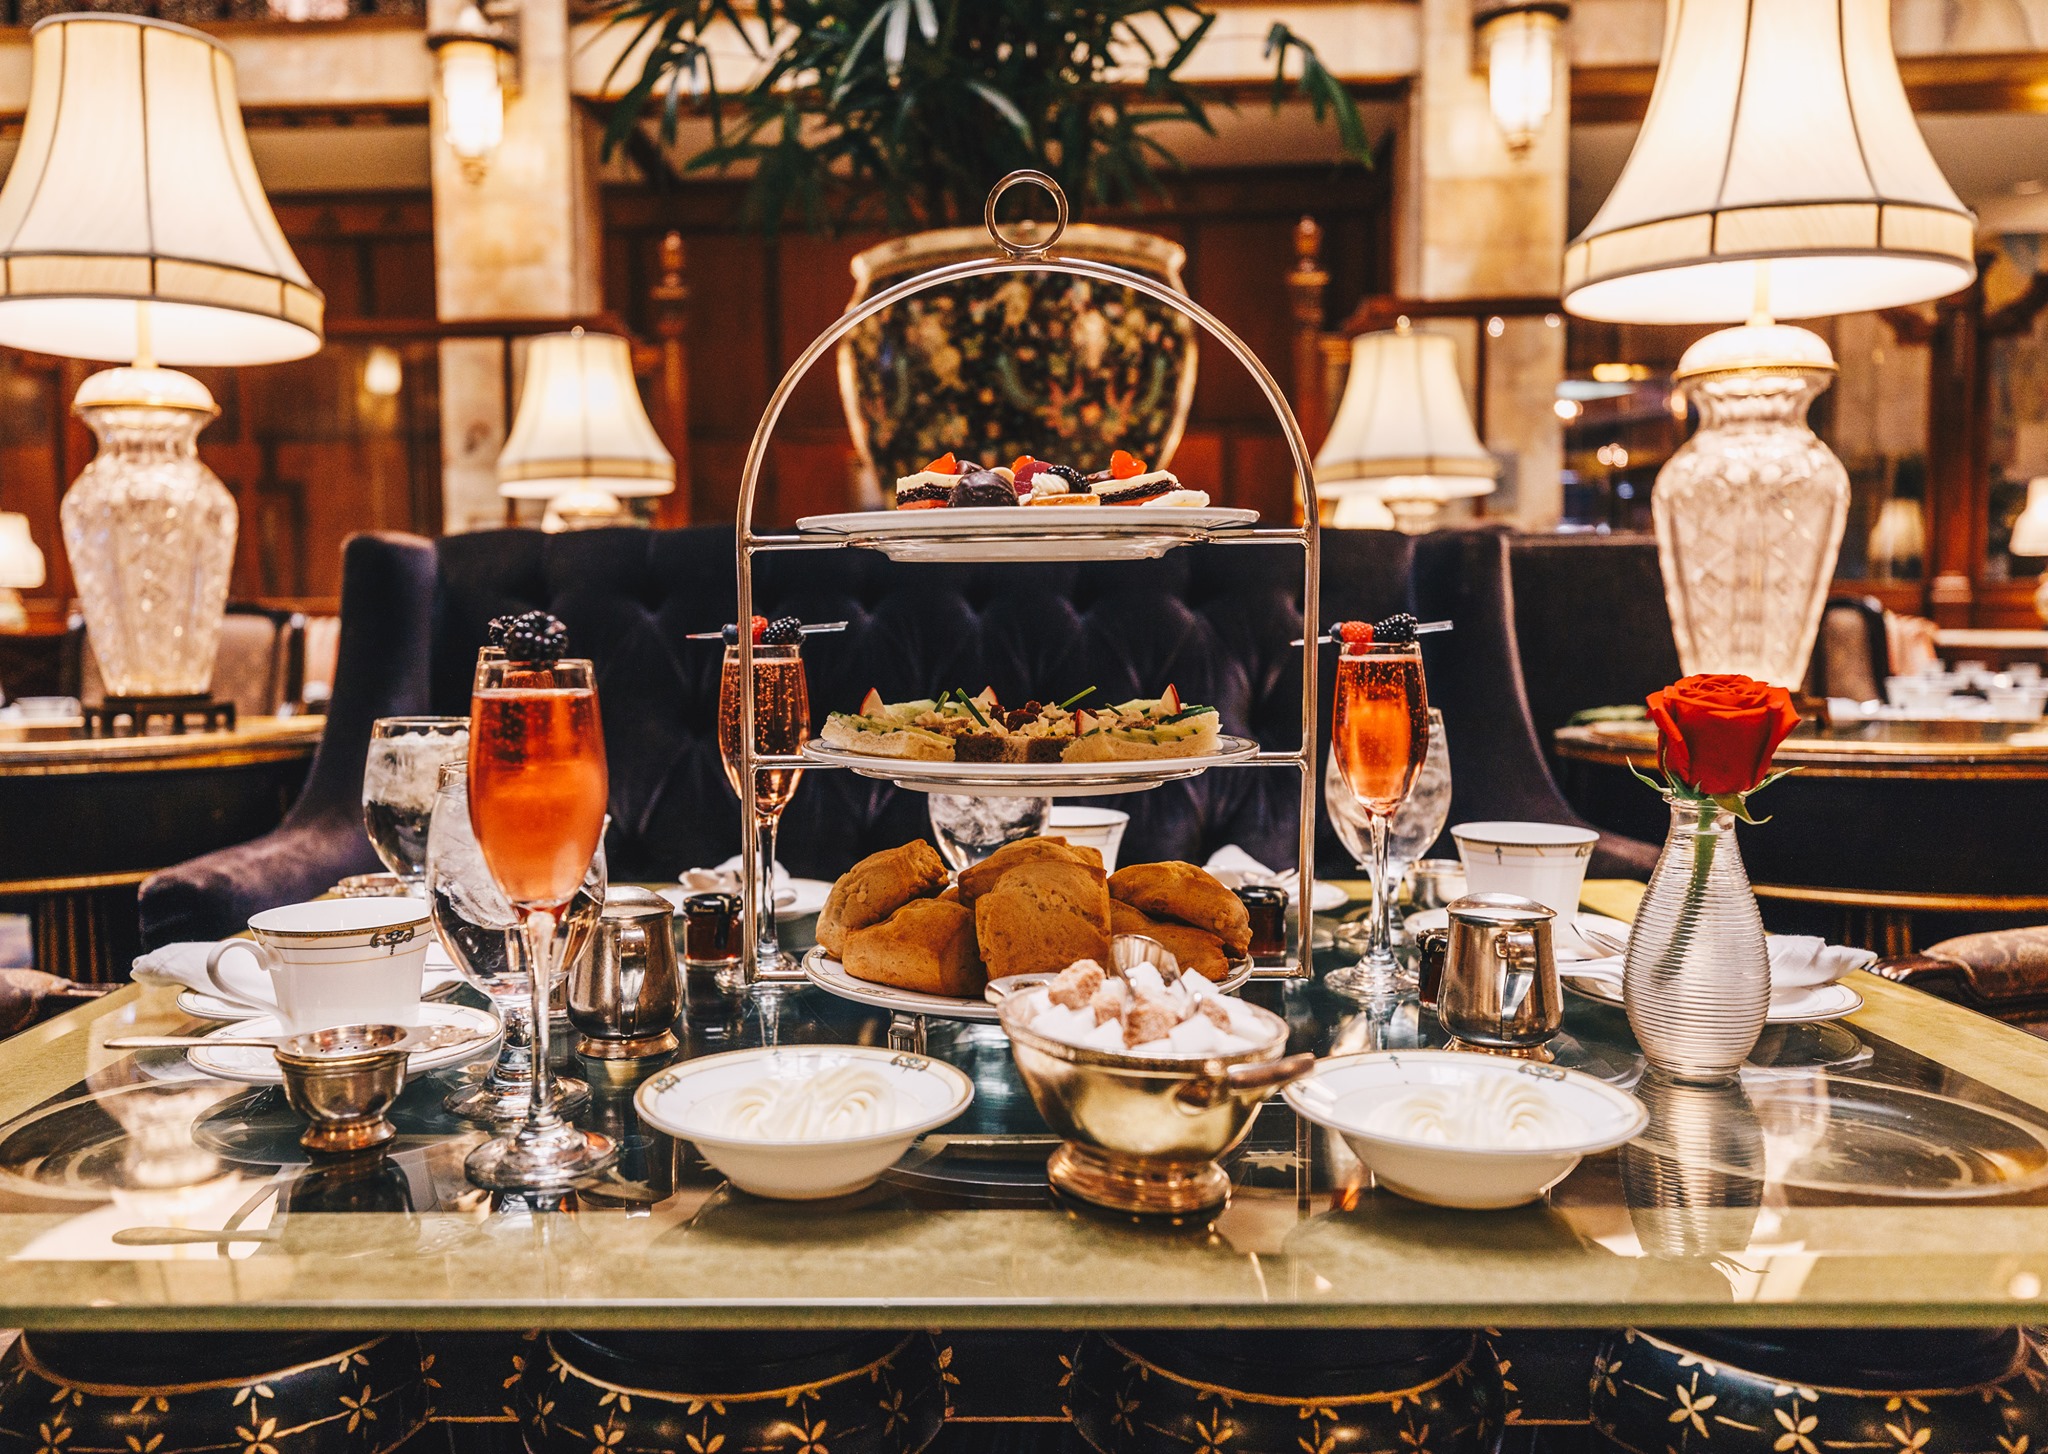 Afternoon Tea at the Brown Palace